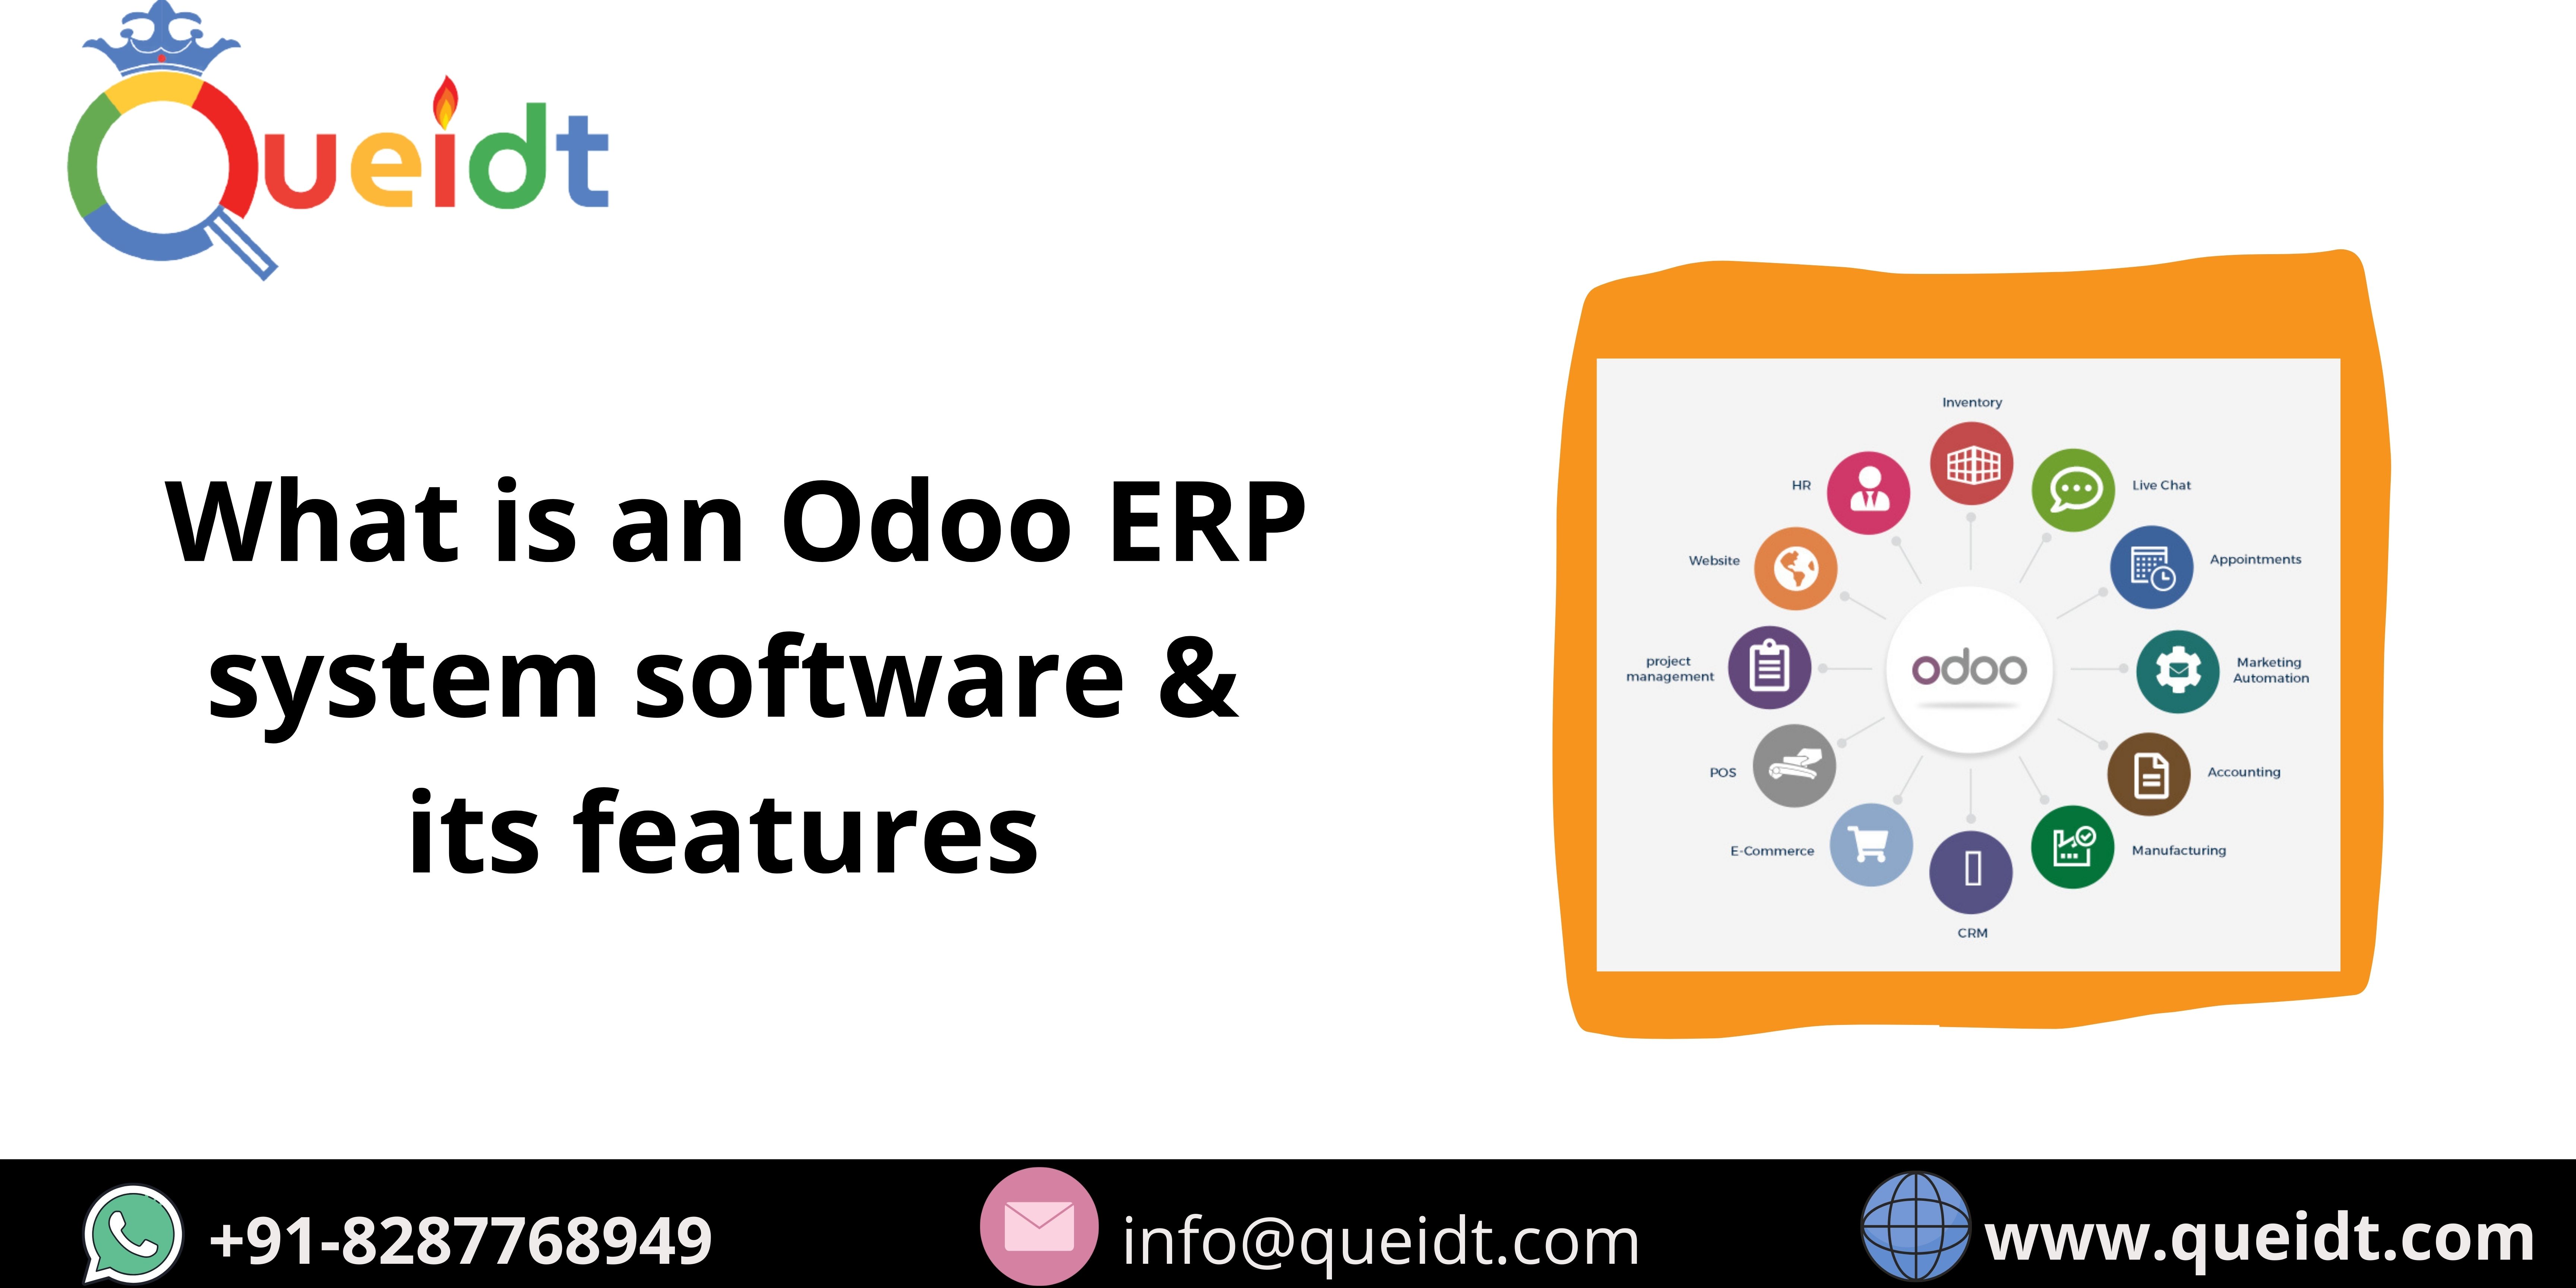  What is an Odoo ERP system software & its features